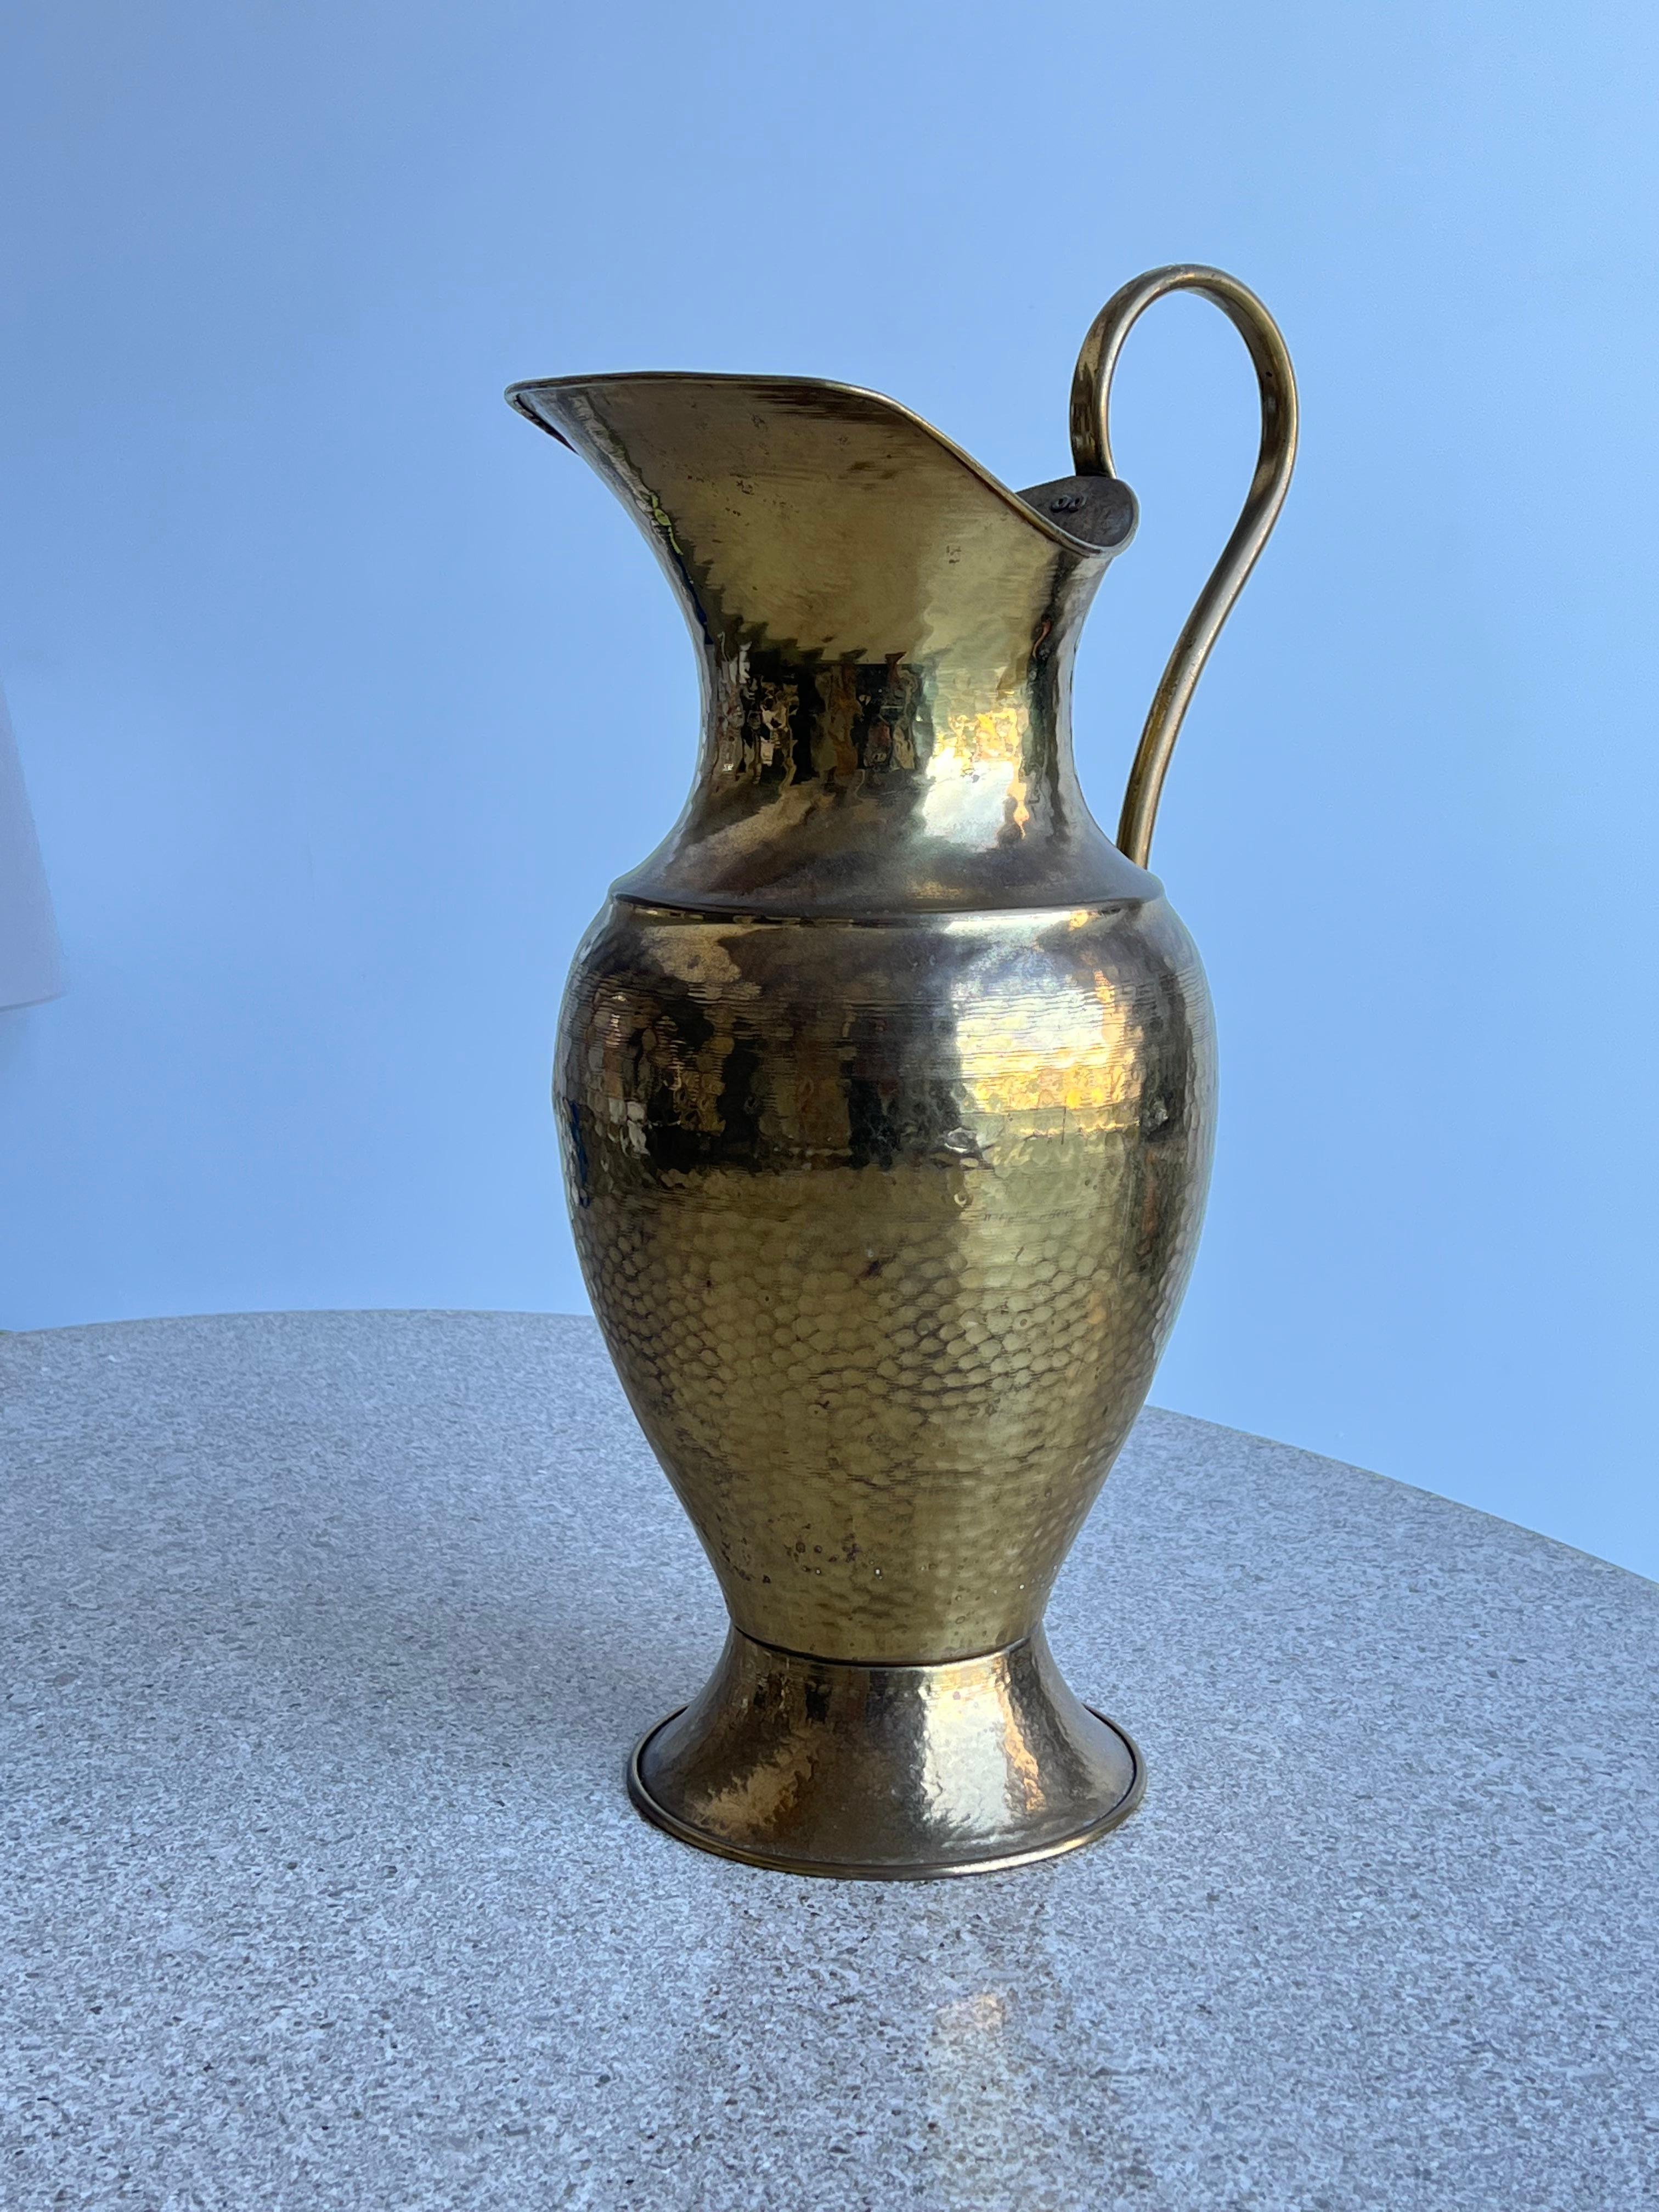 Art Deco 1940s large vase hammered finish.
Really good condition considering the age and use. 

